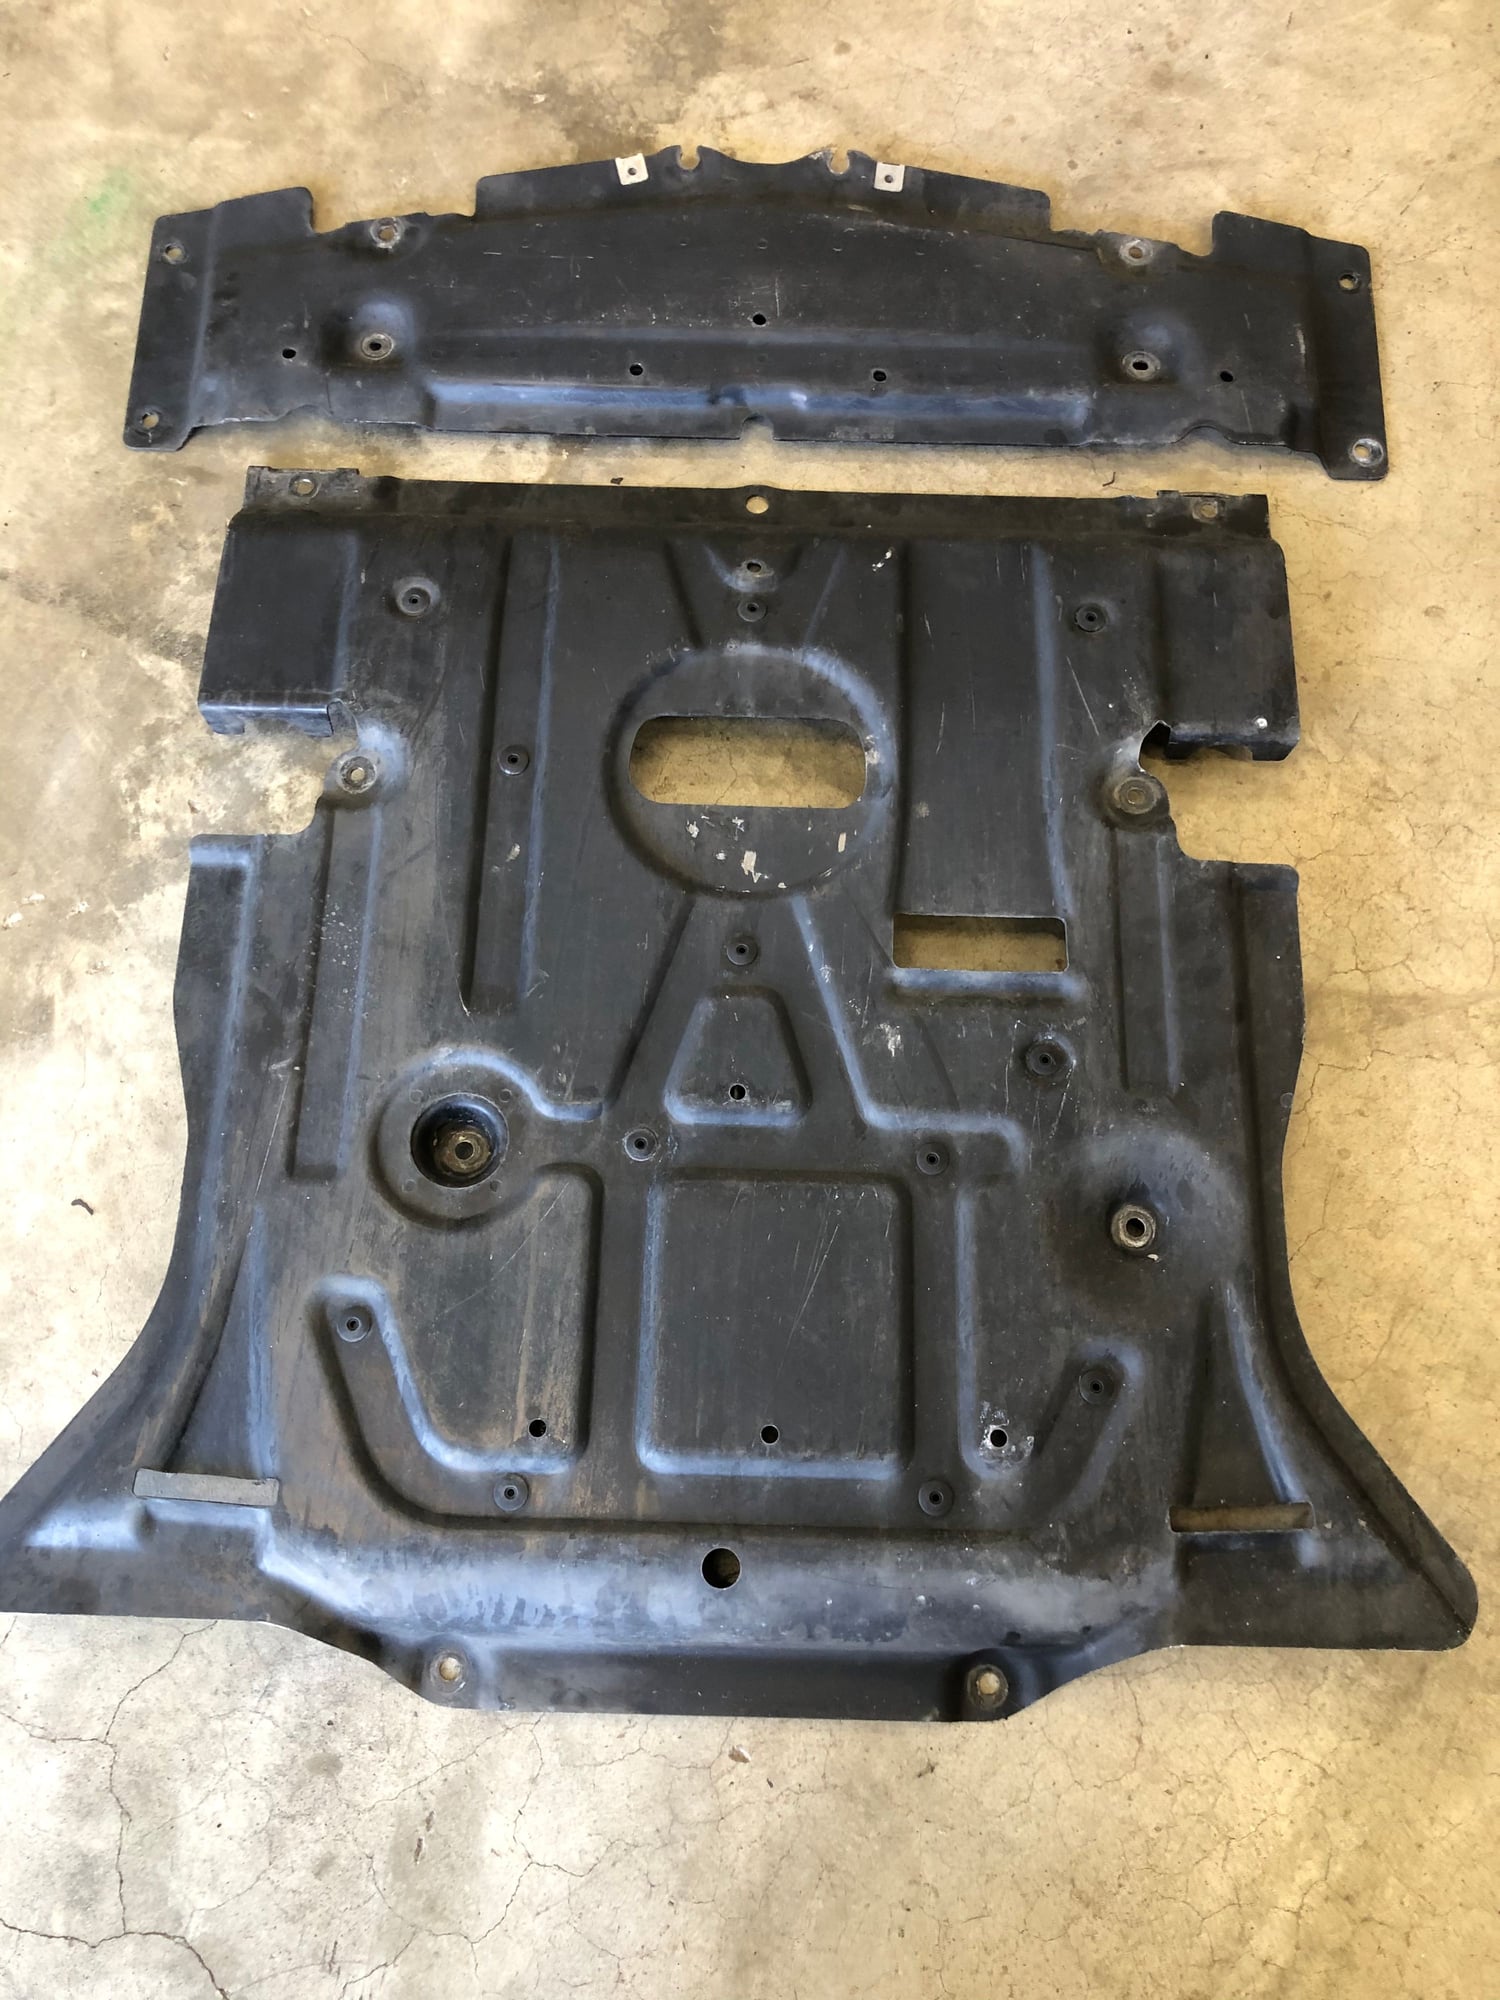 Exterior Body Parts - W or X 166 Off Road package steel skid plates - Used - 2013 to 2019 Mercedes-Benz GL550 - 2012 to 2018 Mercedes-Benz GLE-Class - 2013 to 2019 Mercedes-Benz GL450 - Sykesville, MD 21784, United States